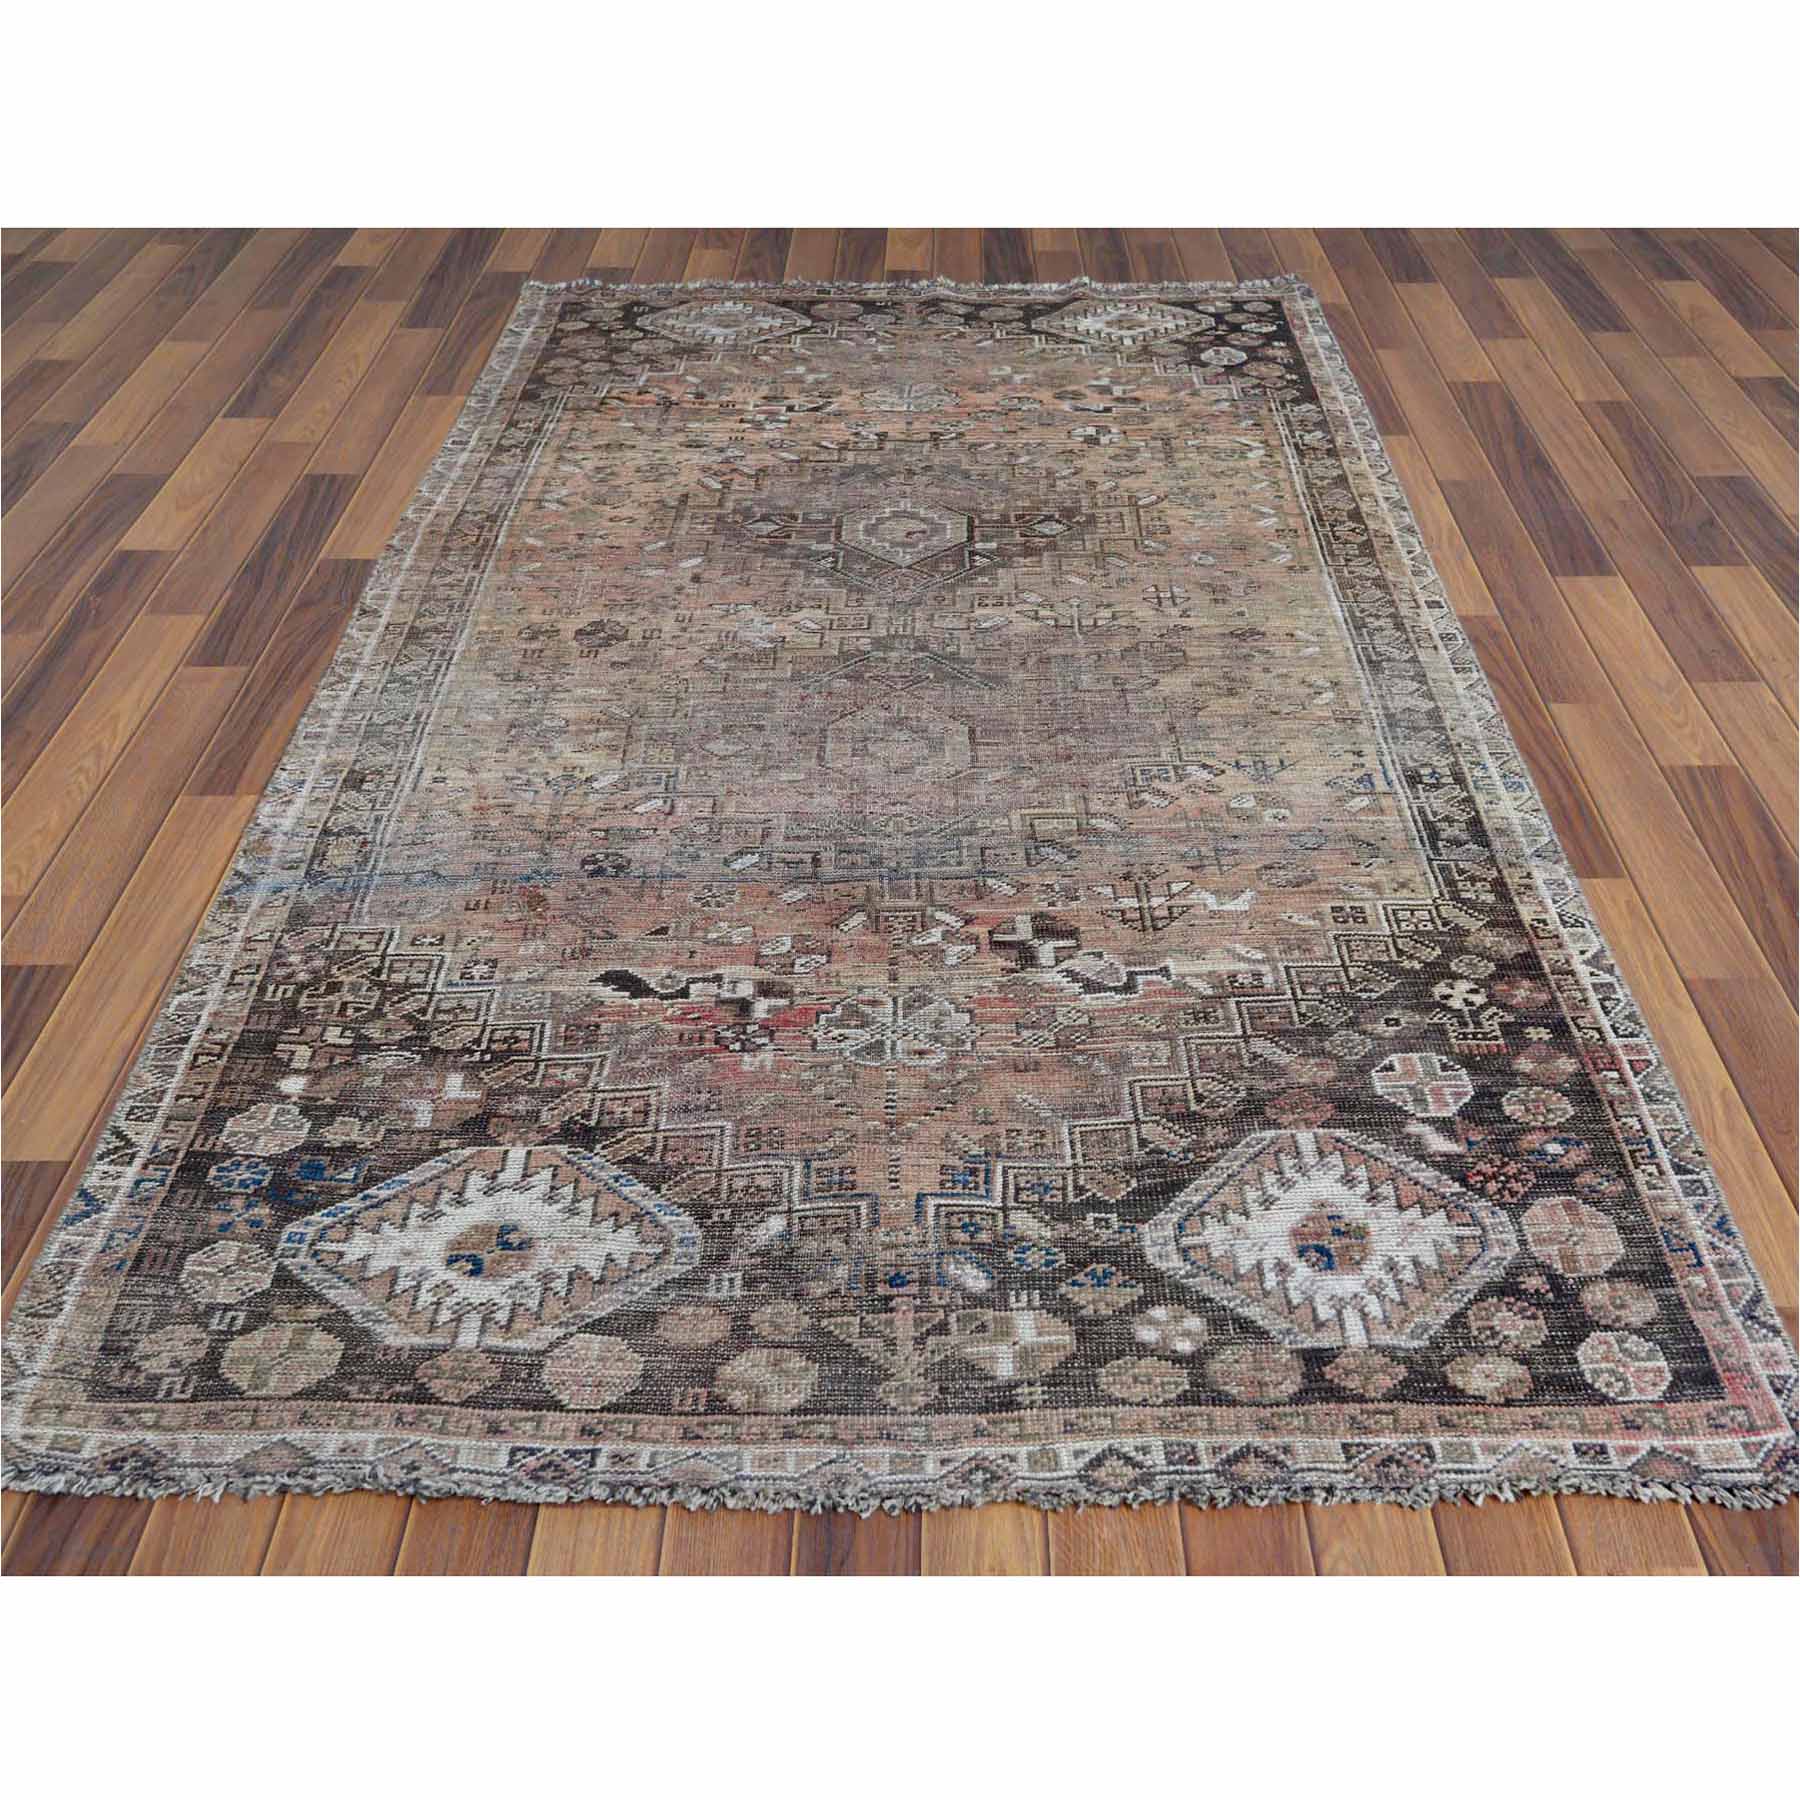 Overdyed-Vintage-Hand-Knotted-Rug-303110